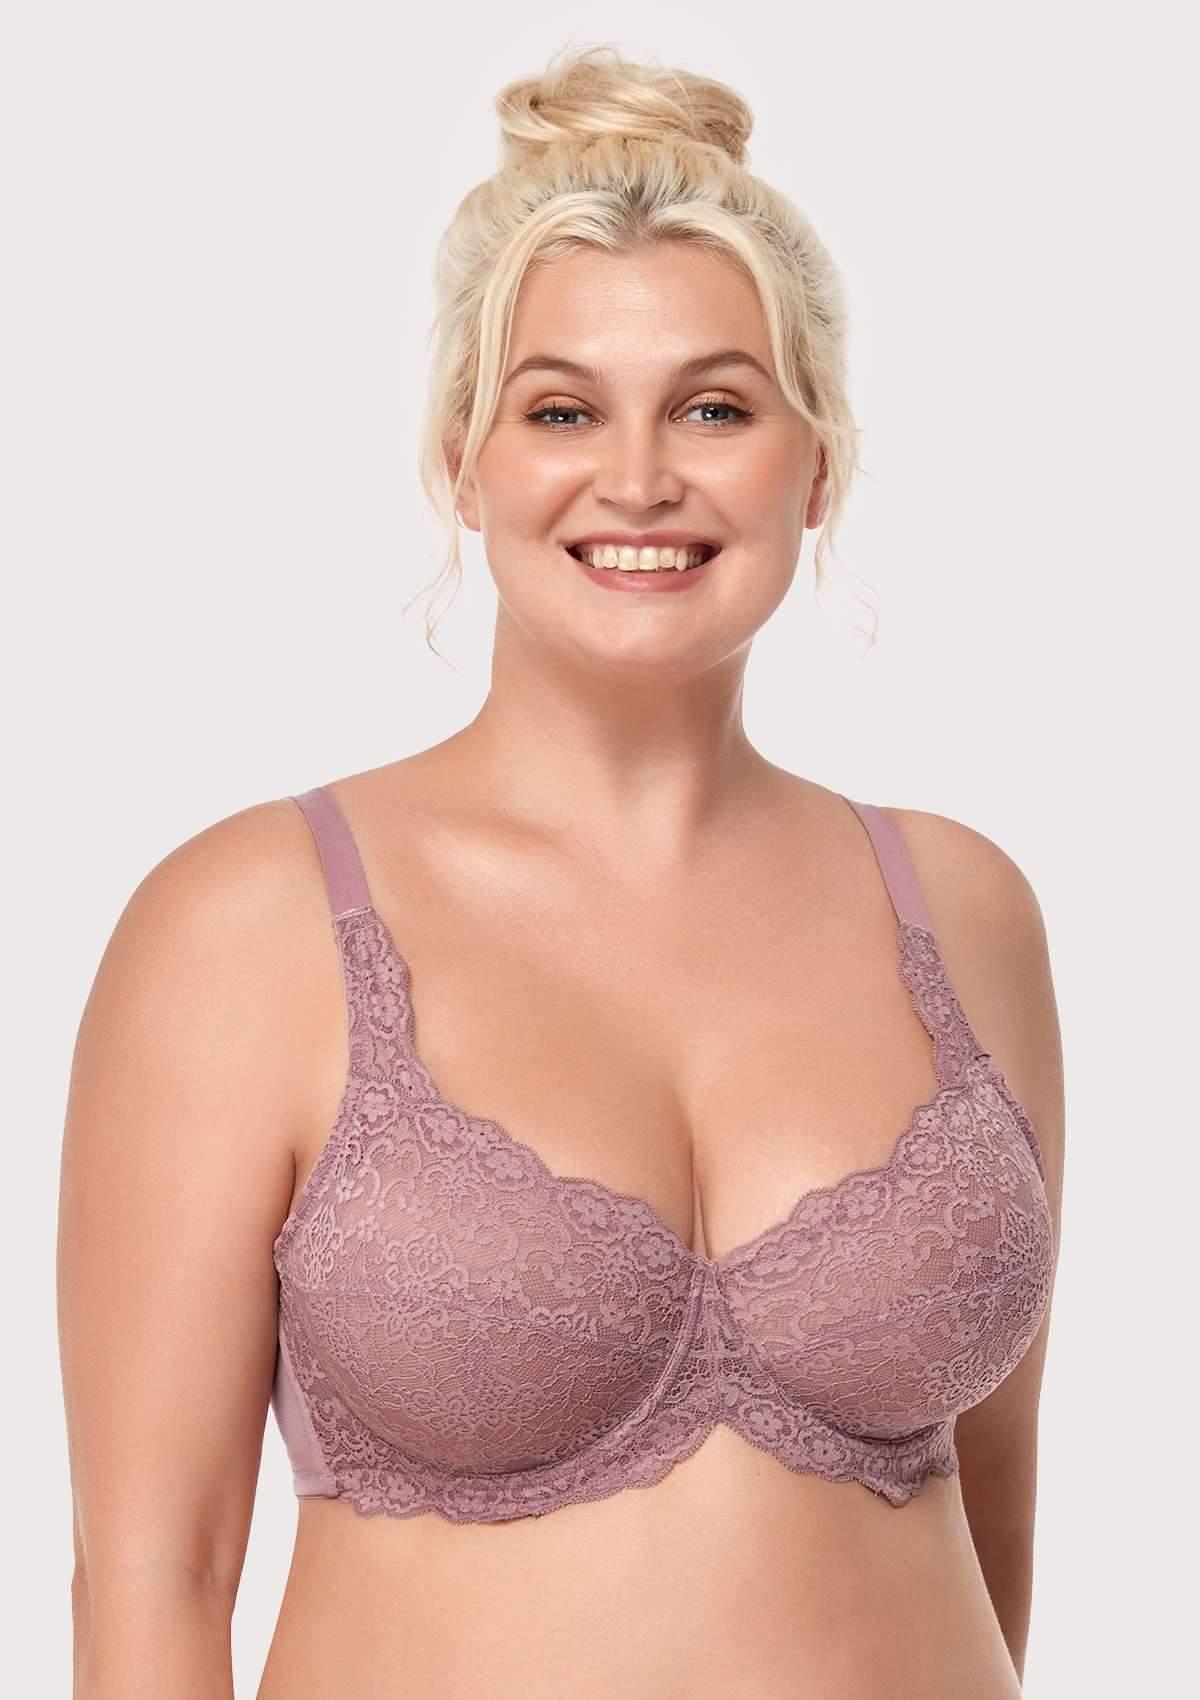 HSIA All-Over Floral Lace Unlined Bra: Minimizer Bra For Heavy Breasts - Purple / 36 / DDD/F